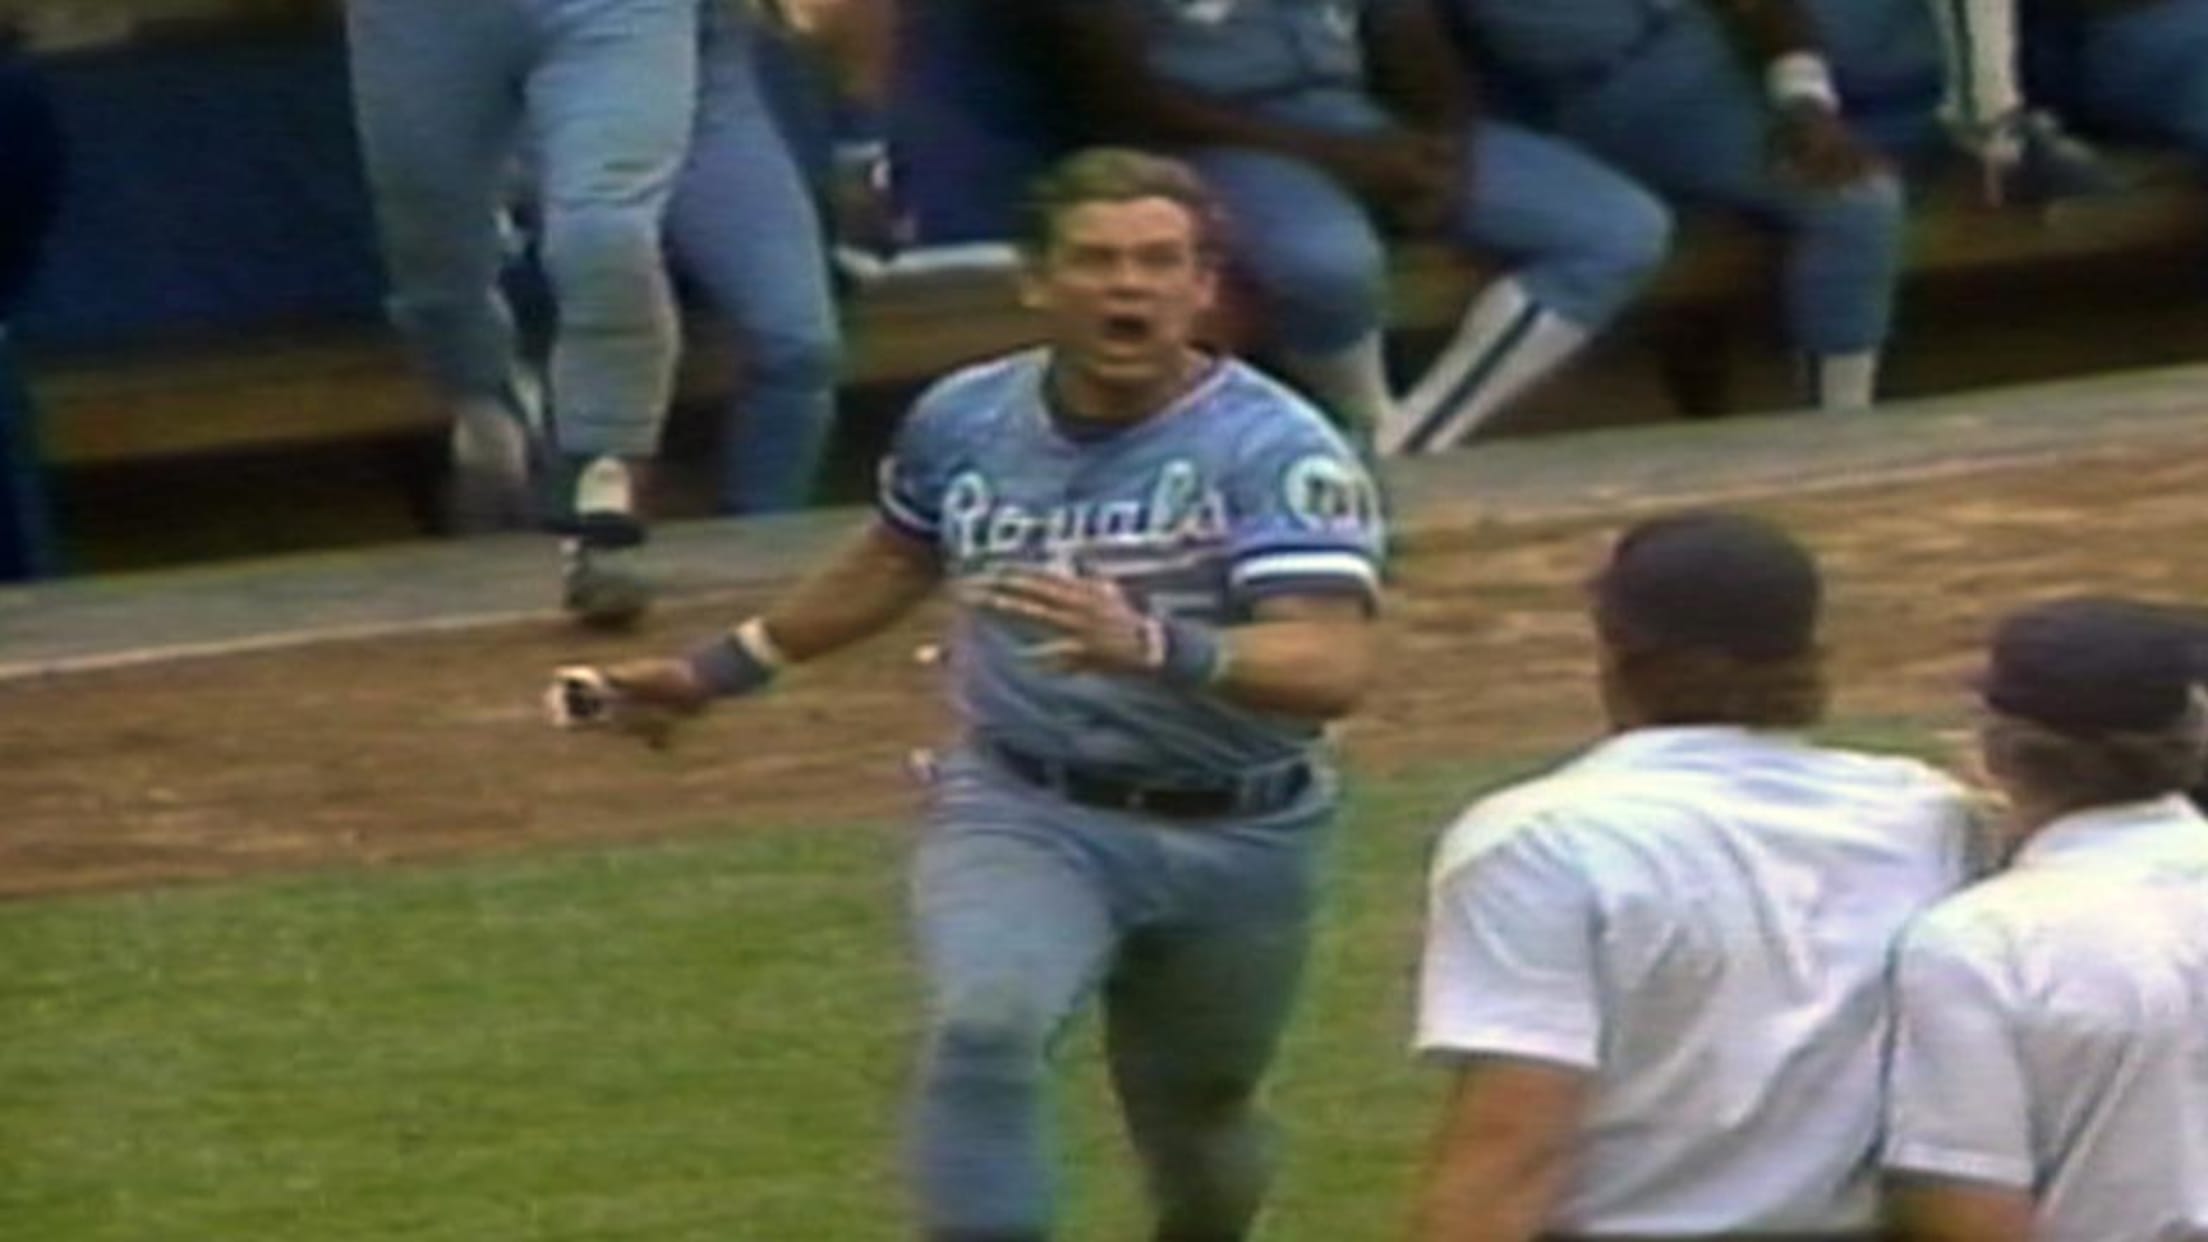 7/24/83: The Pine Tar Incident, 07/24/1983